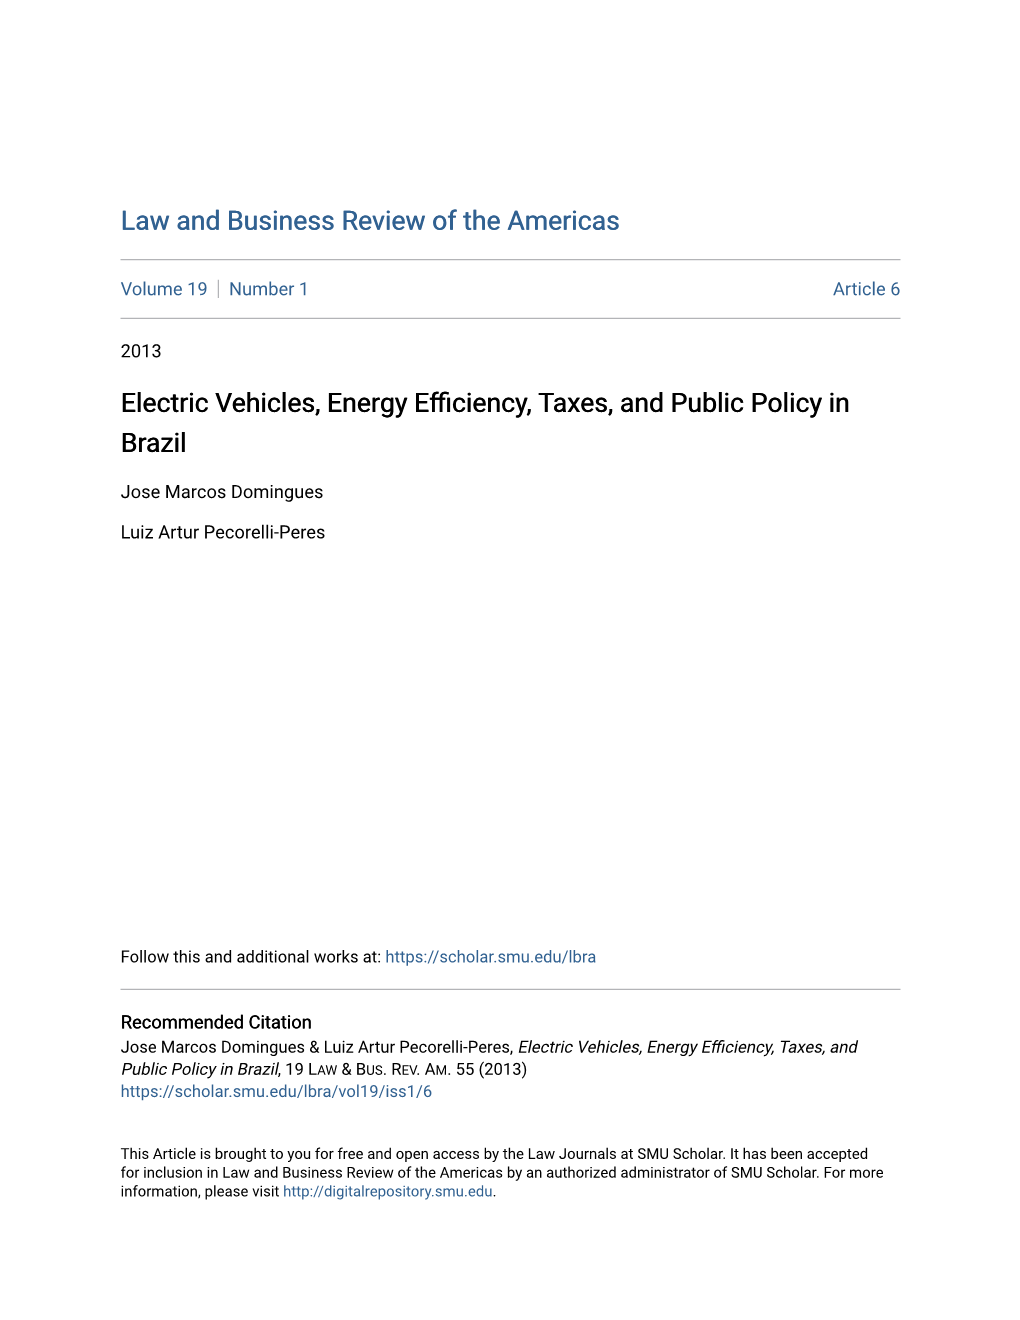 Electric Vehicles, Energy Efficiency, Taxes, and Public Policy in Brazil